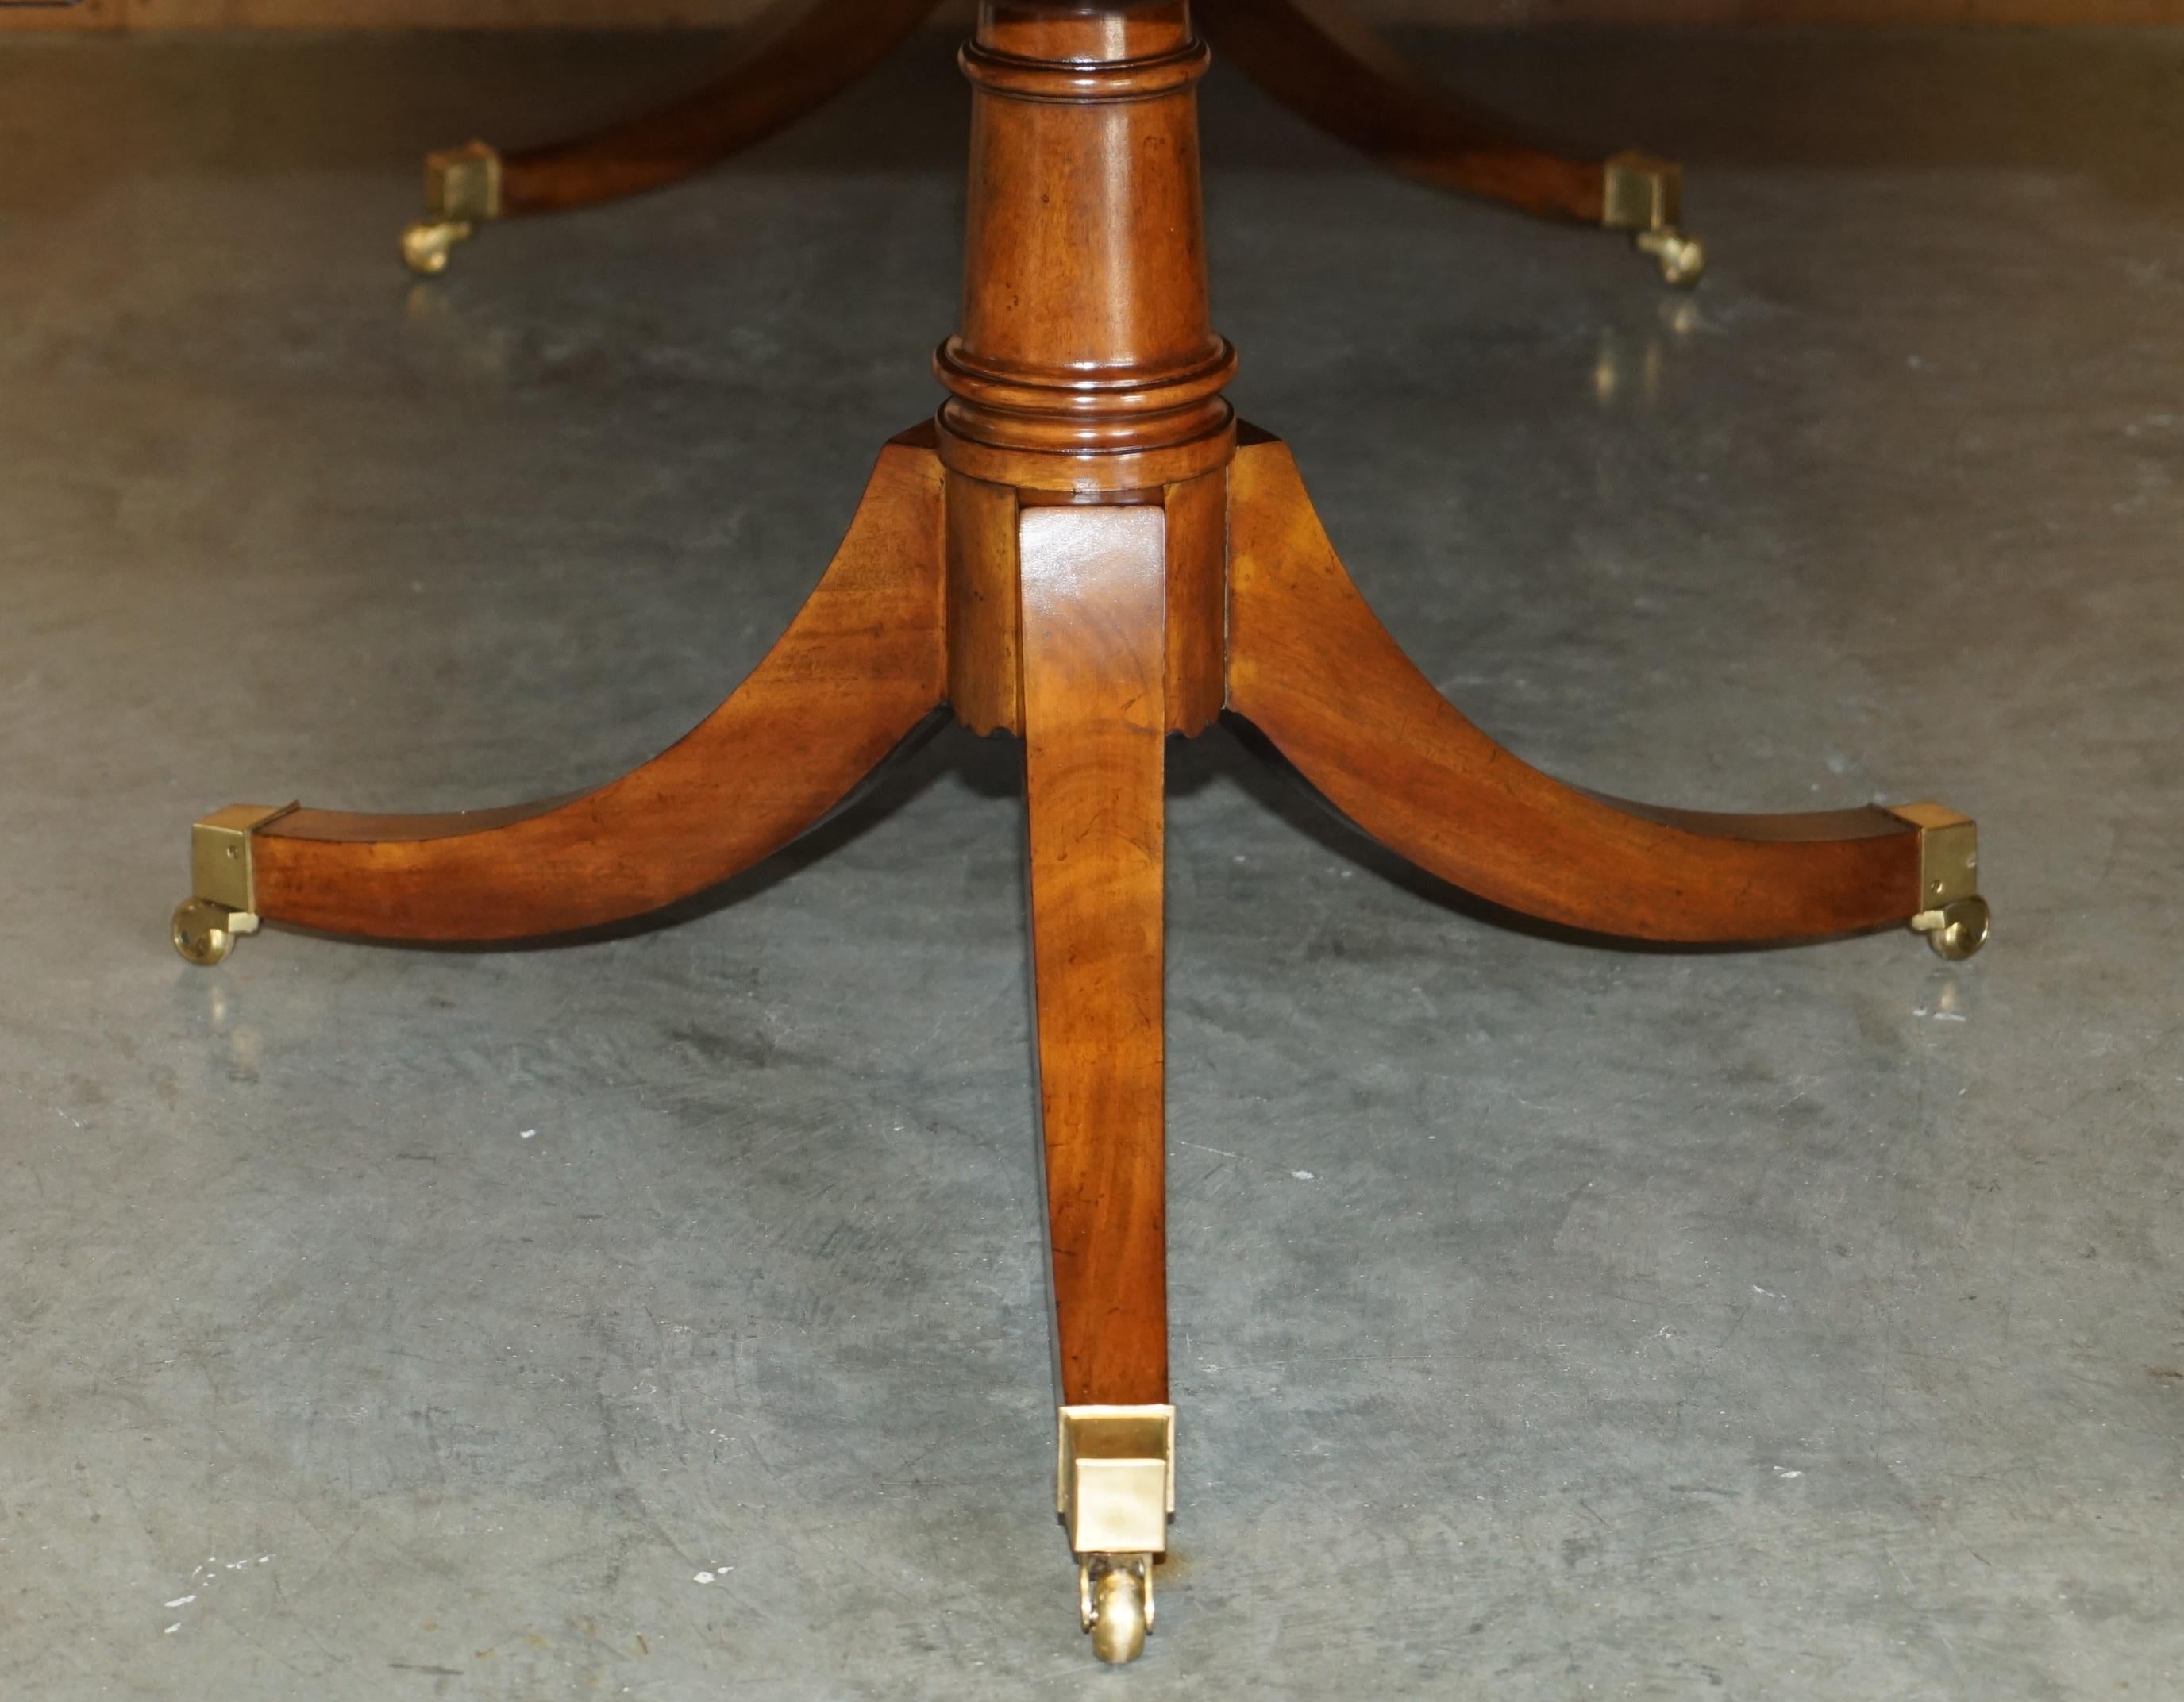 EXQUISITE TWO PEDESTAL BURR WALNUT EXTENDING DiNING TABLE & 10 CHAIRS SUITE For Sale 2